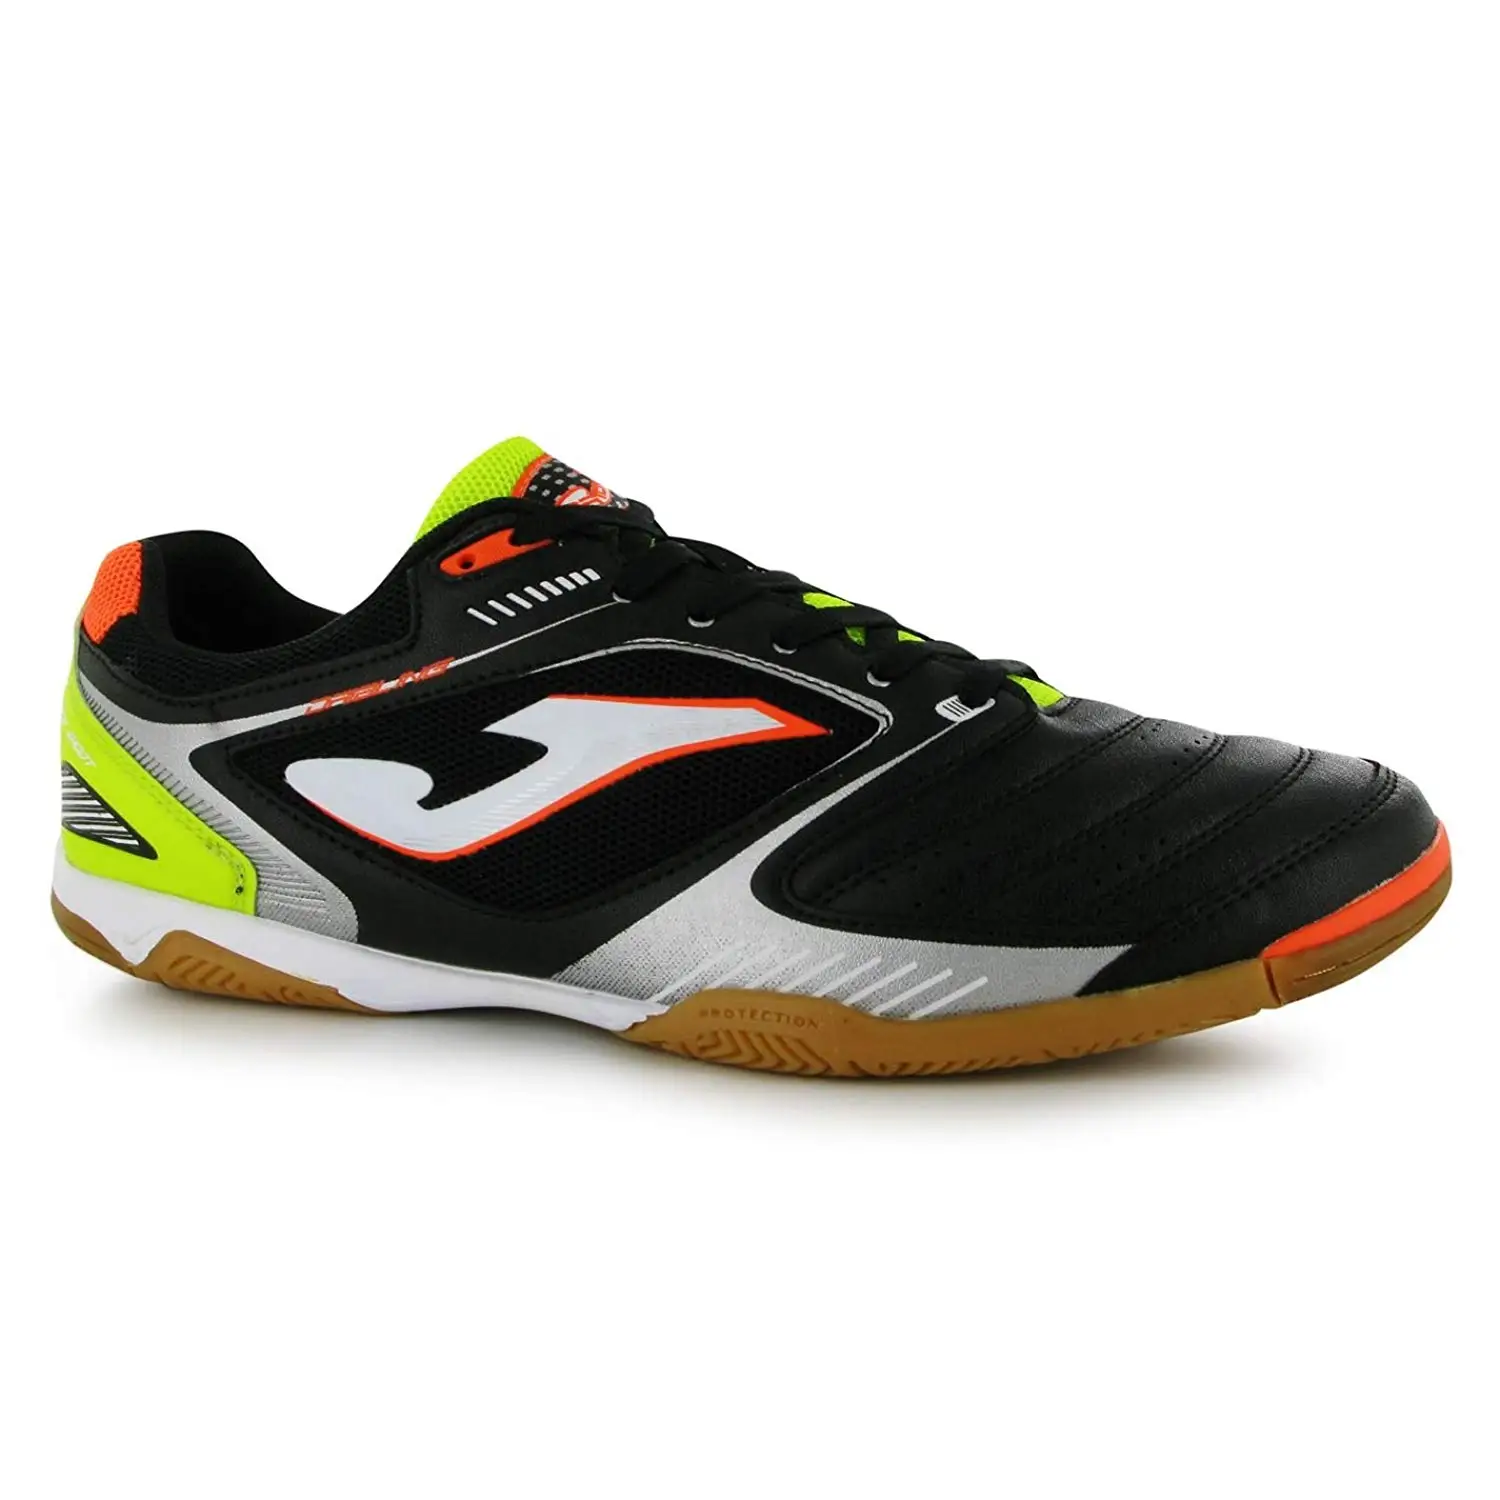 Cheap Football Trainers Sale, find 